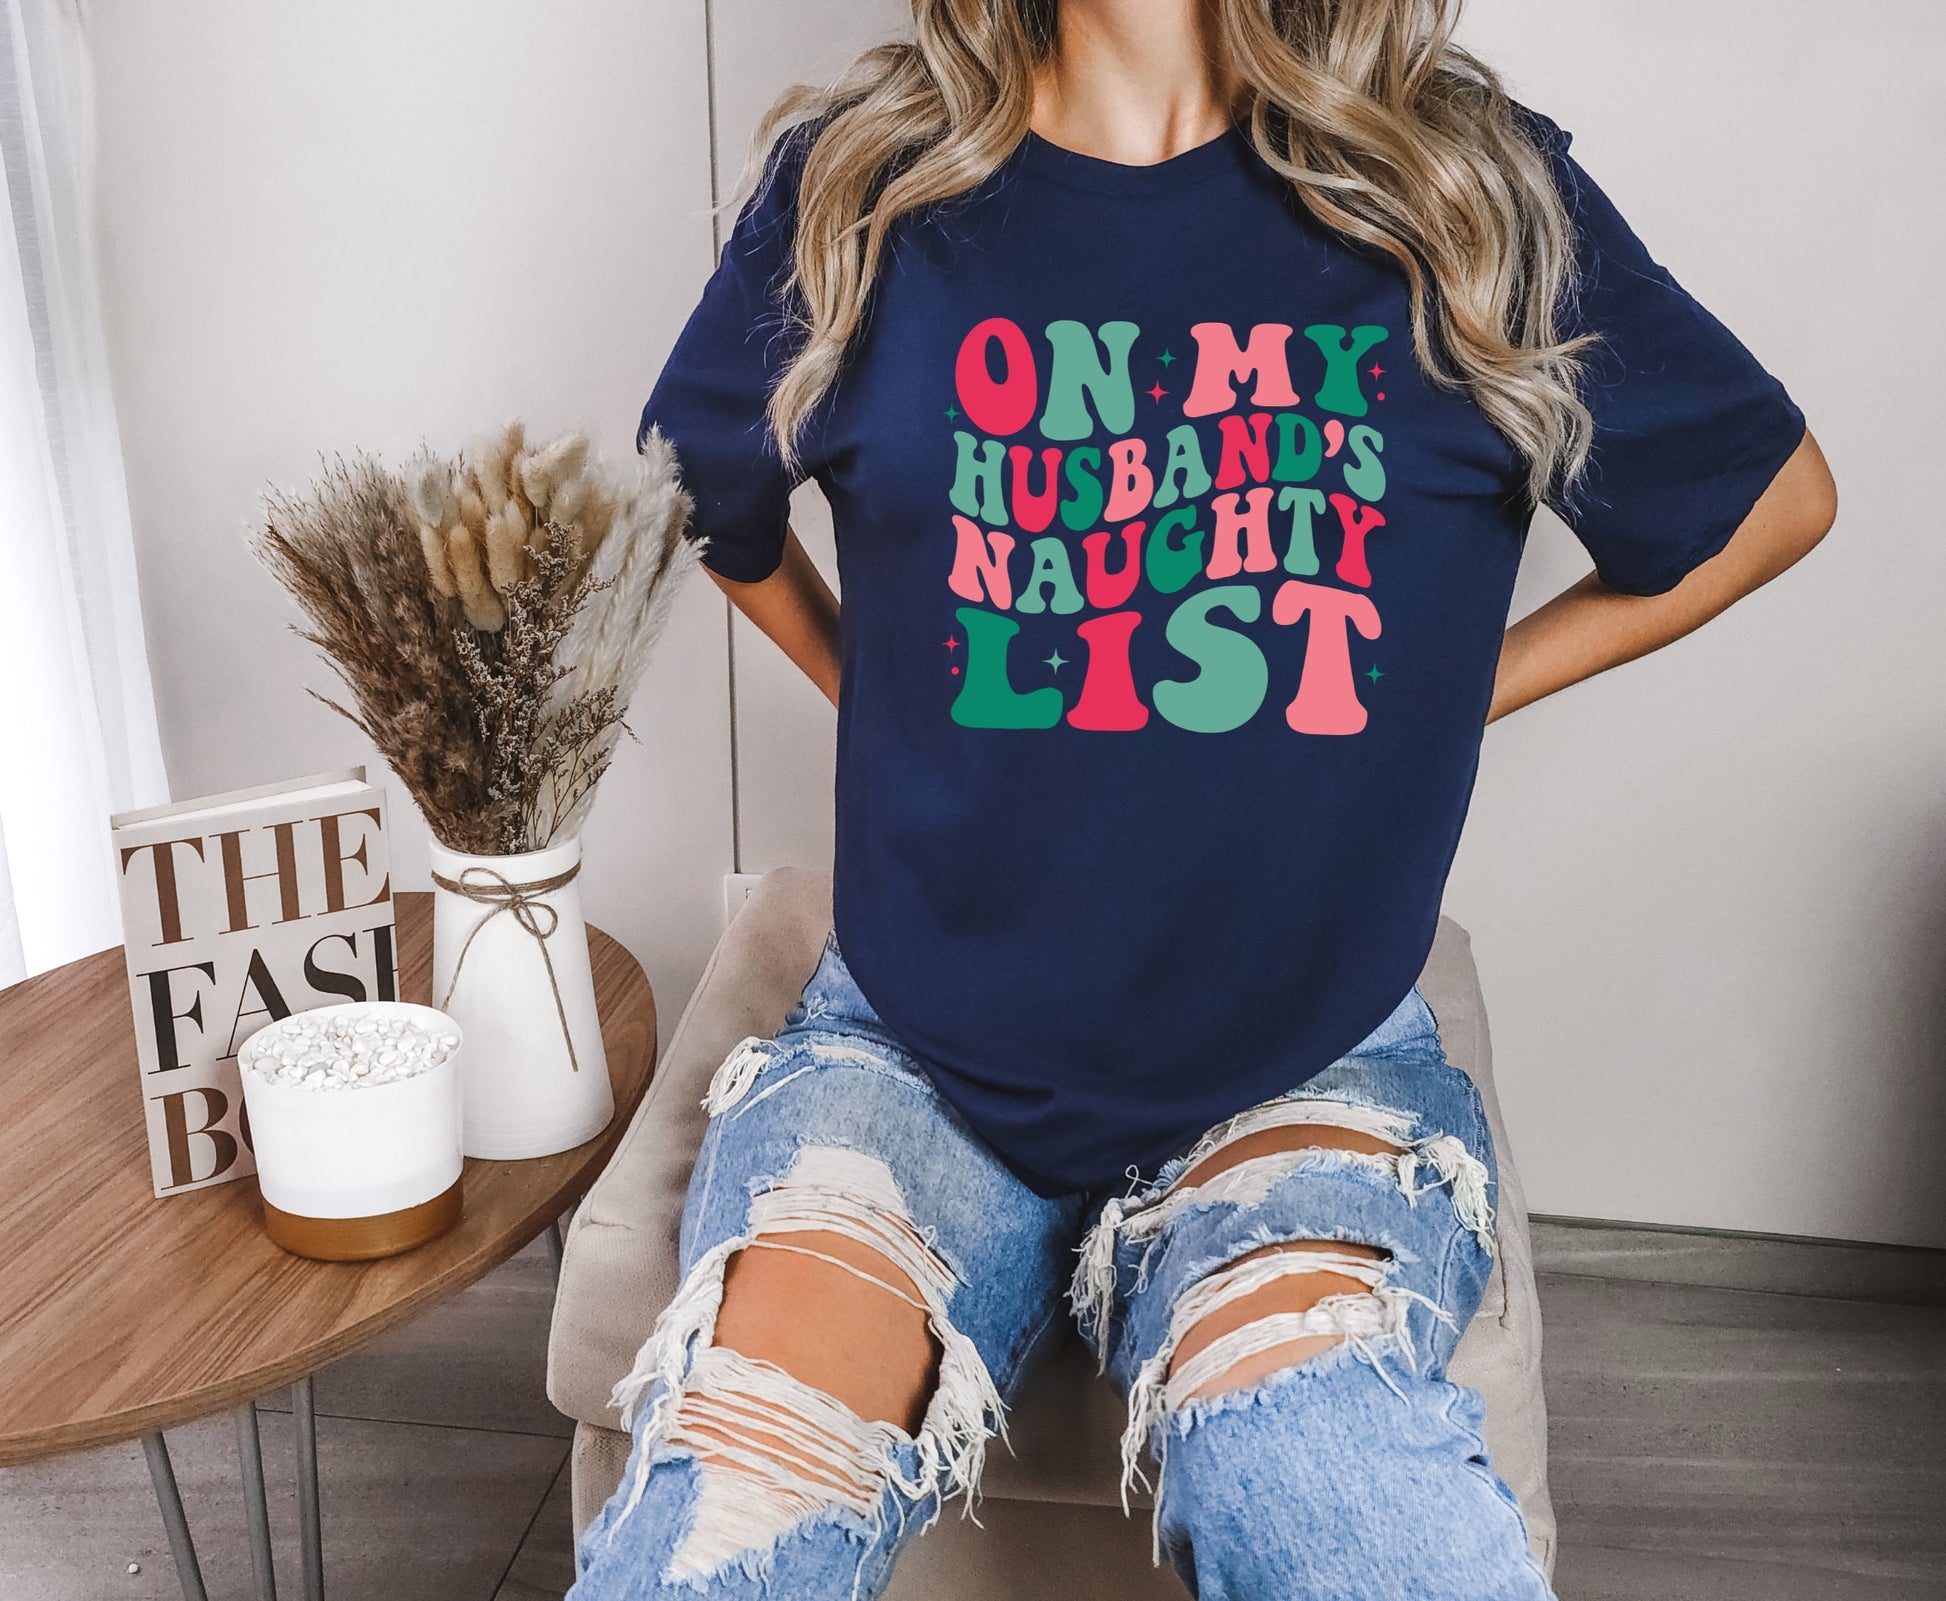 The On My Husbands Naughty List Christmas Shirt Makes the Perfect Gift for Friends, Family, Coworkers or yourself.  Check Out My Shop for even more Great Designs. www.scorpiontees.etsy.com